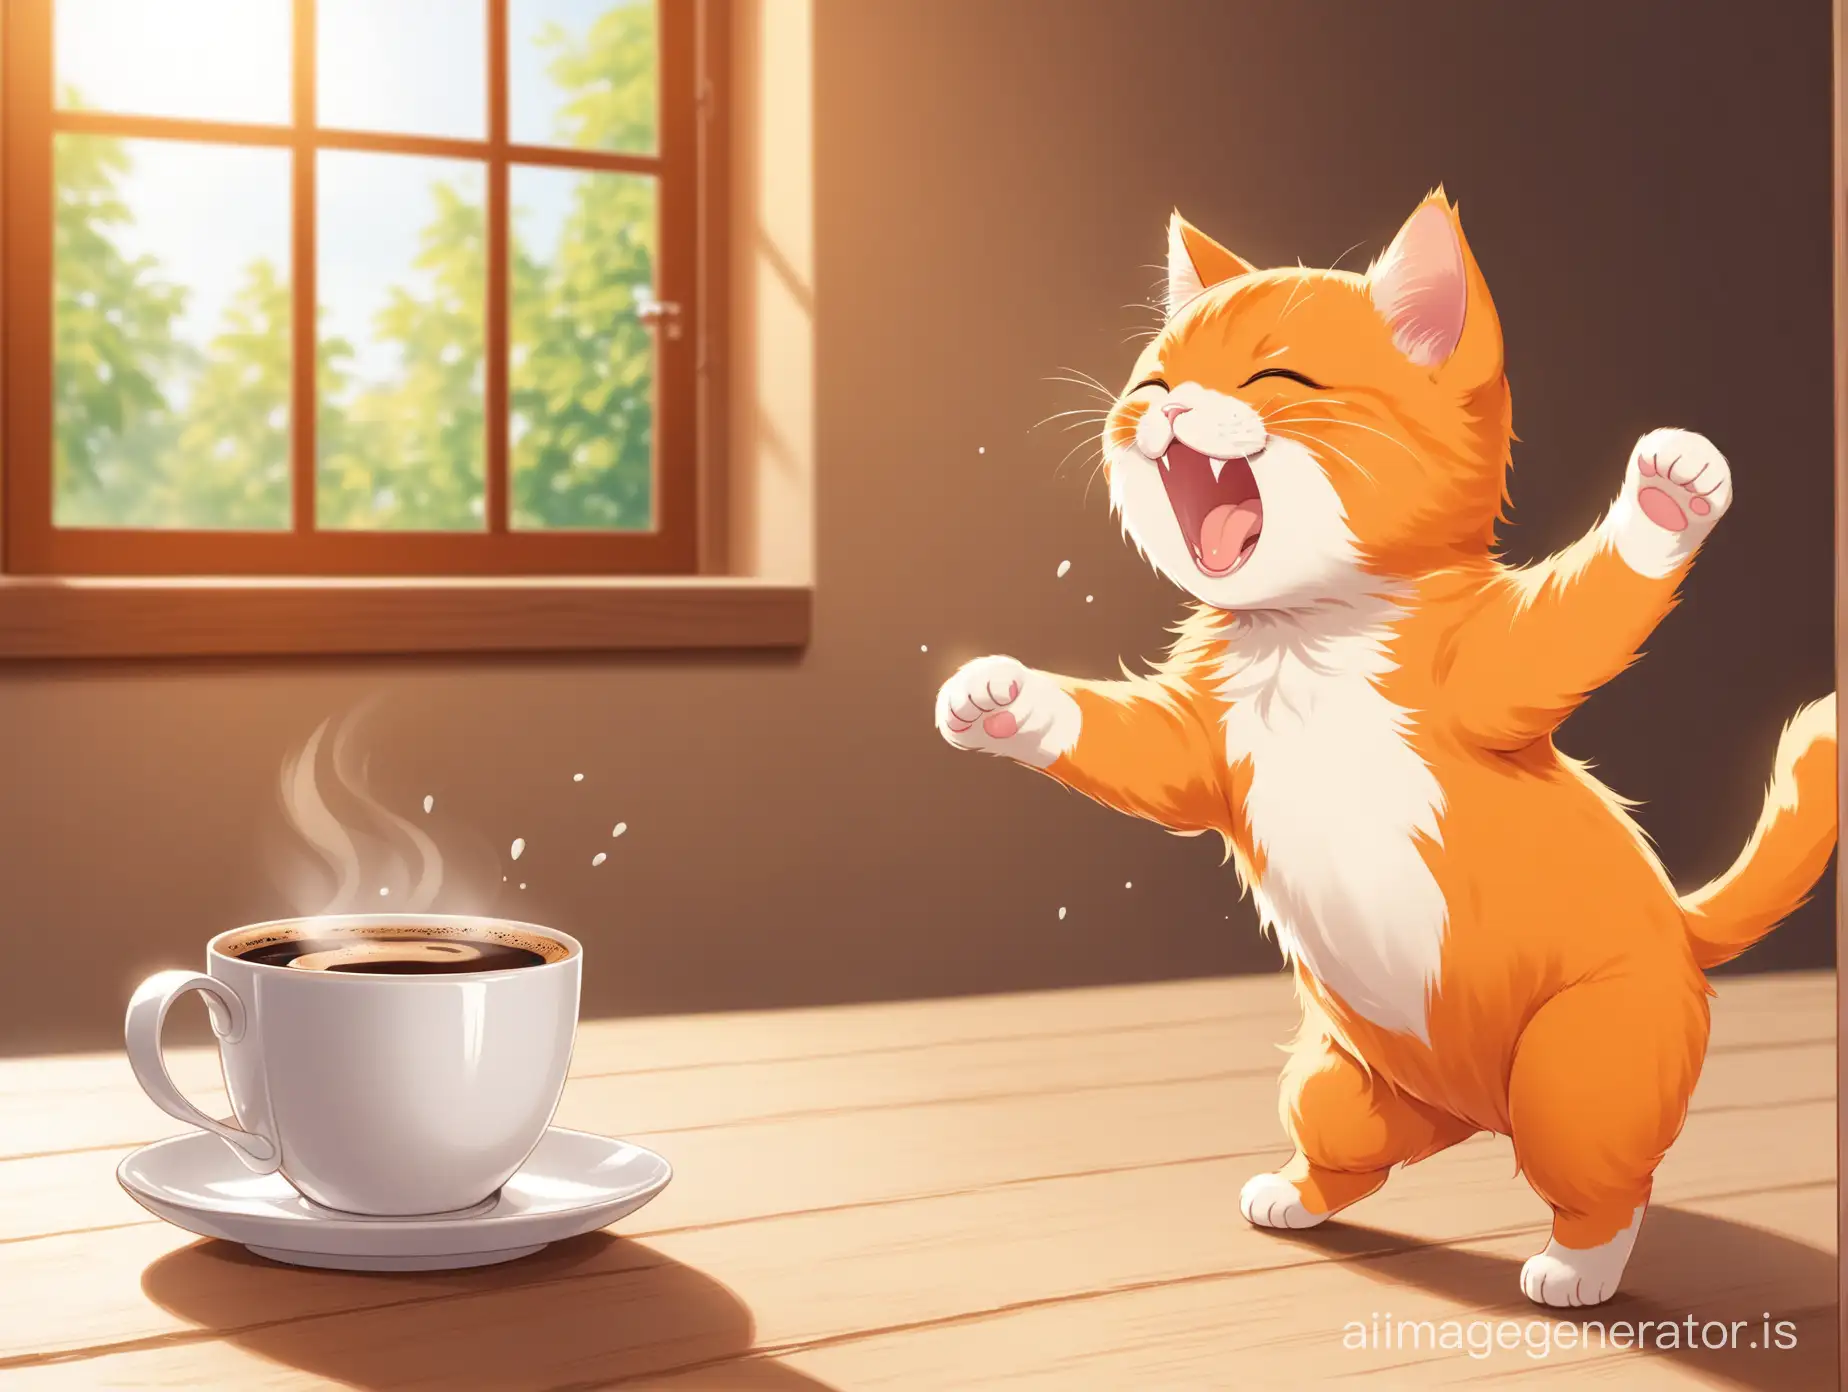 kitten yawning next to a cup of coffee, photo, Shutterstock contest winner, smiling and dancing, orange cat, scene!!